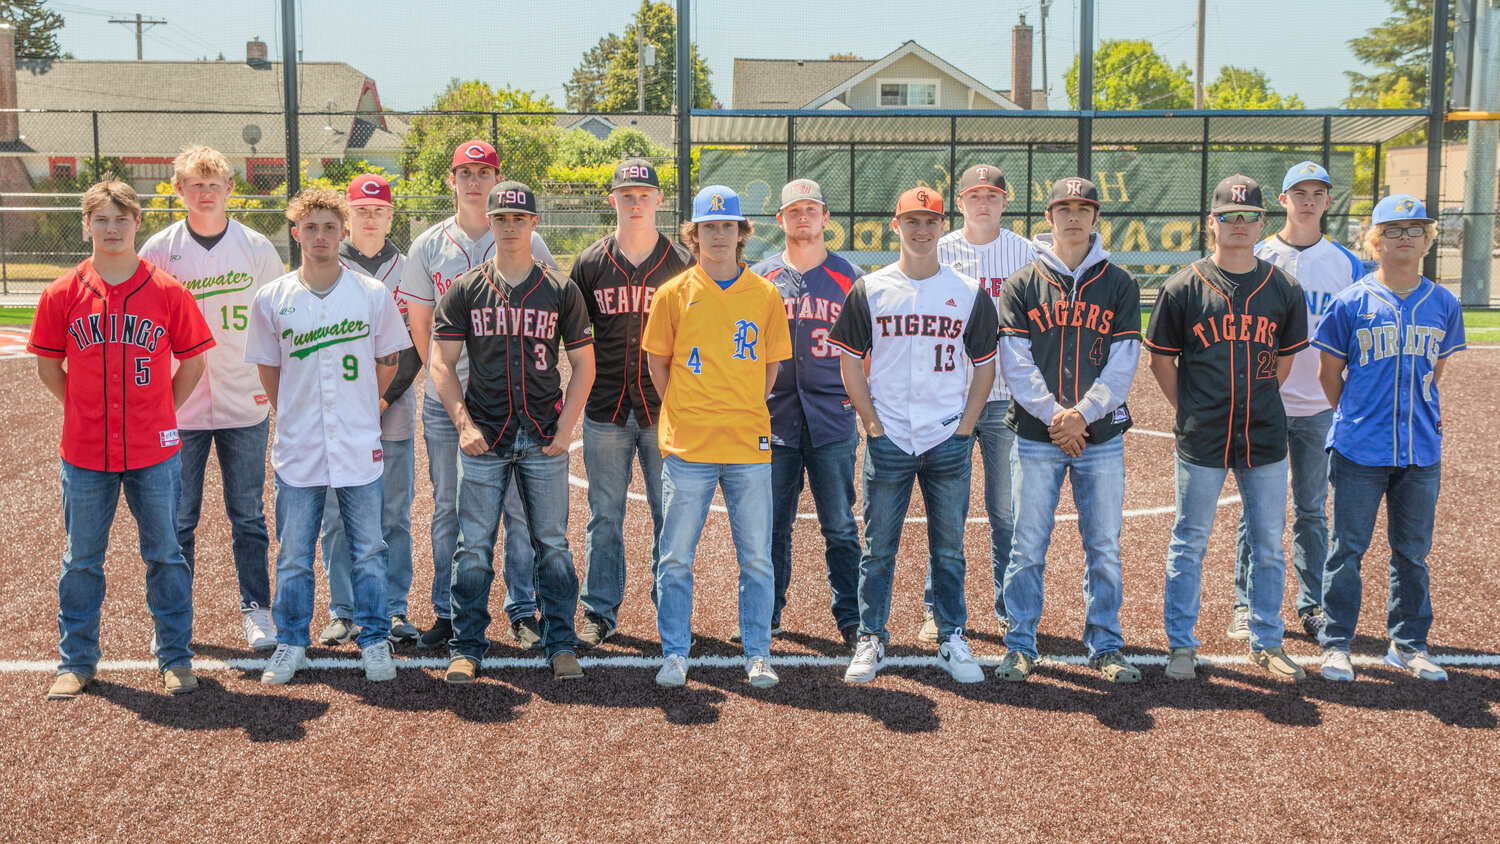 From left to right, Mossyrock’s Keegan Kolb, Tumwater’s Alex Overbay and Eddie Marson, W.F. West’s Deacon Meller and Hunter Lutman, Tenino’s Easton Snider and Austin Gonia, Rochester’s Mason Ubias, PWV’s Garrett Keeton, Centralia’s Brady Sprague, Toledo’s Caiden Schultz, Napavine’s Ashton Demarest and Conner Holmes, and Adna’s Danner Hoinowski and Tristan Percival pose at Bob Peters Field in Centralia. Not pictured: Rochester’s Braden Hartley.